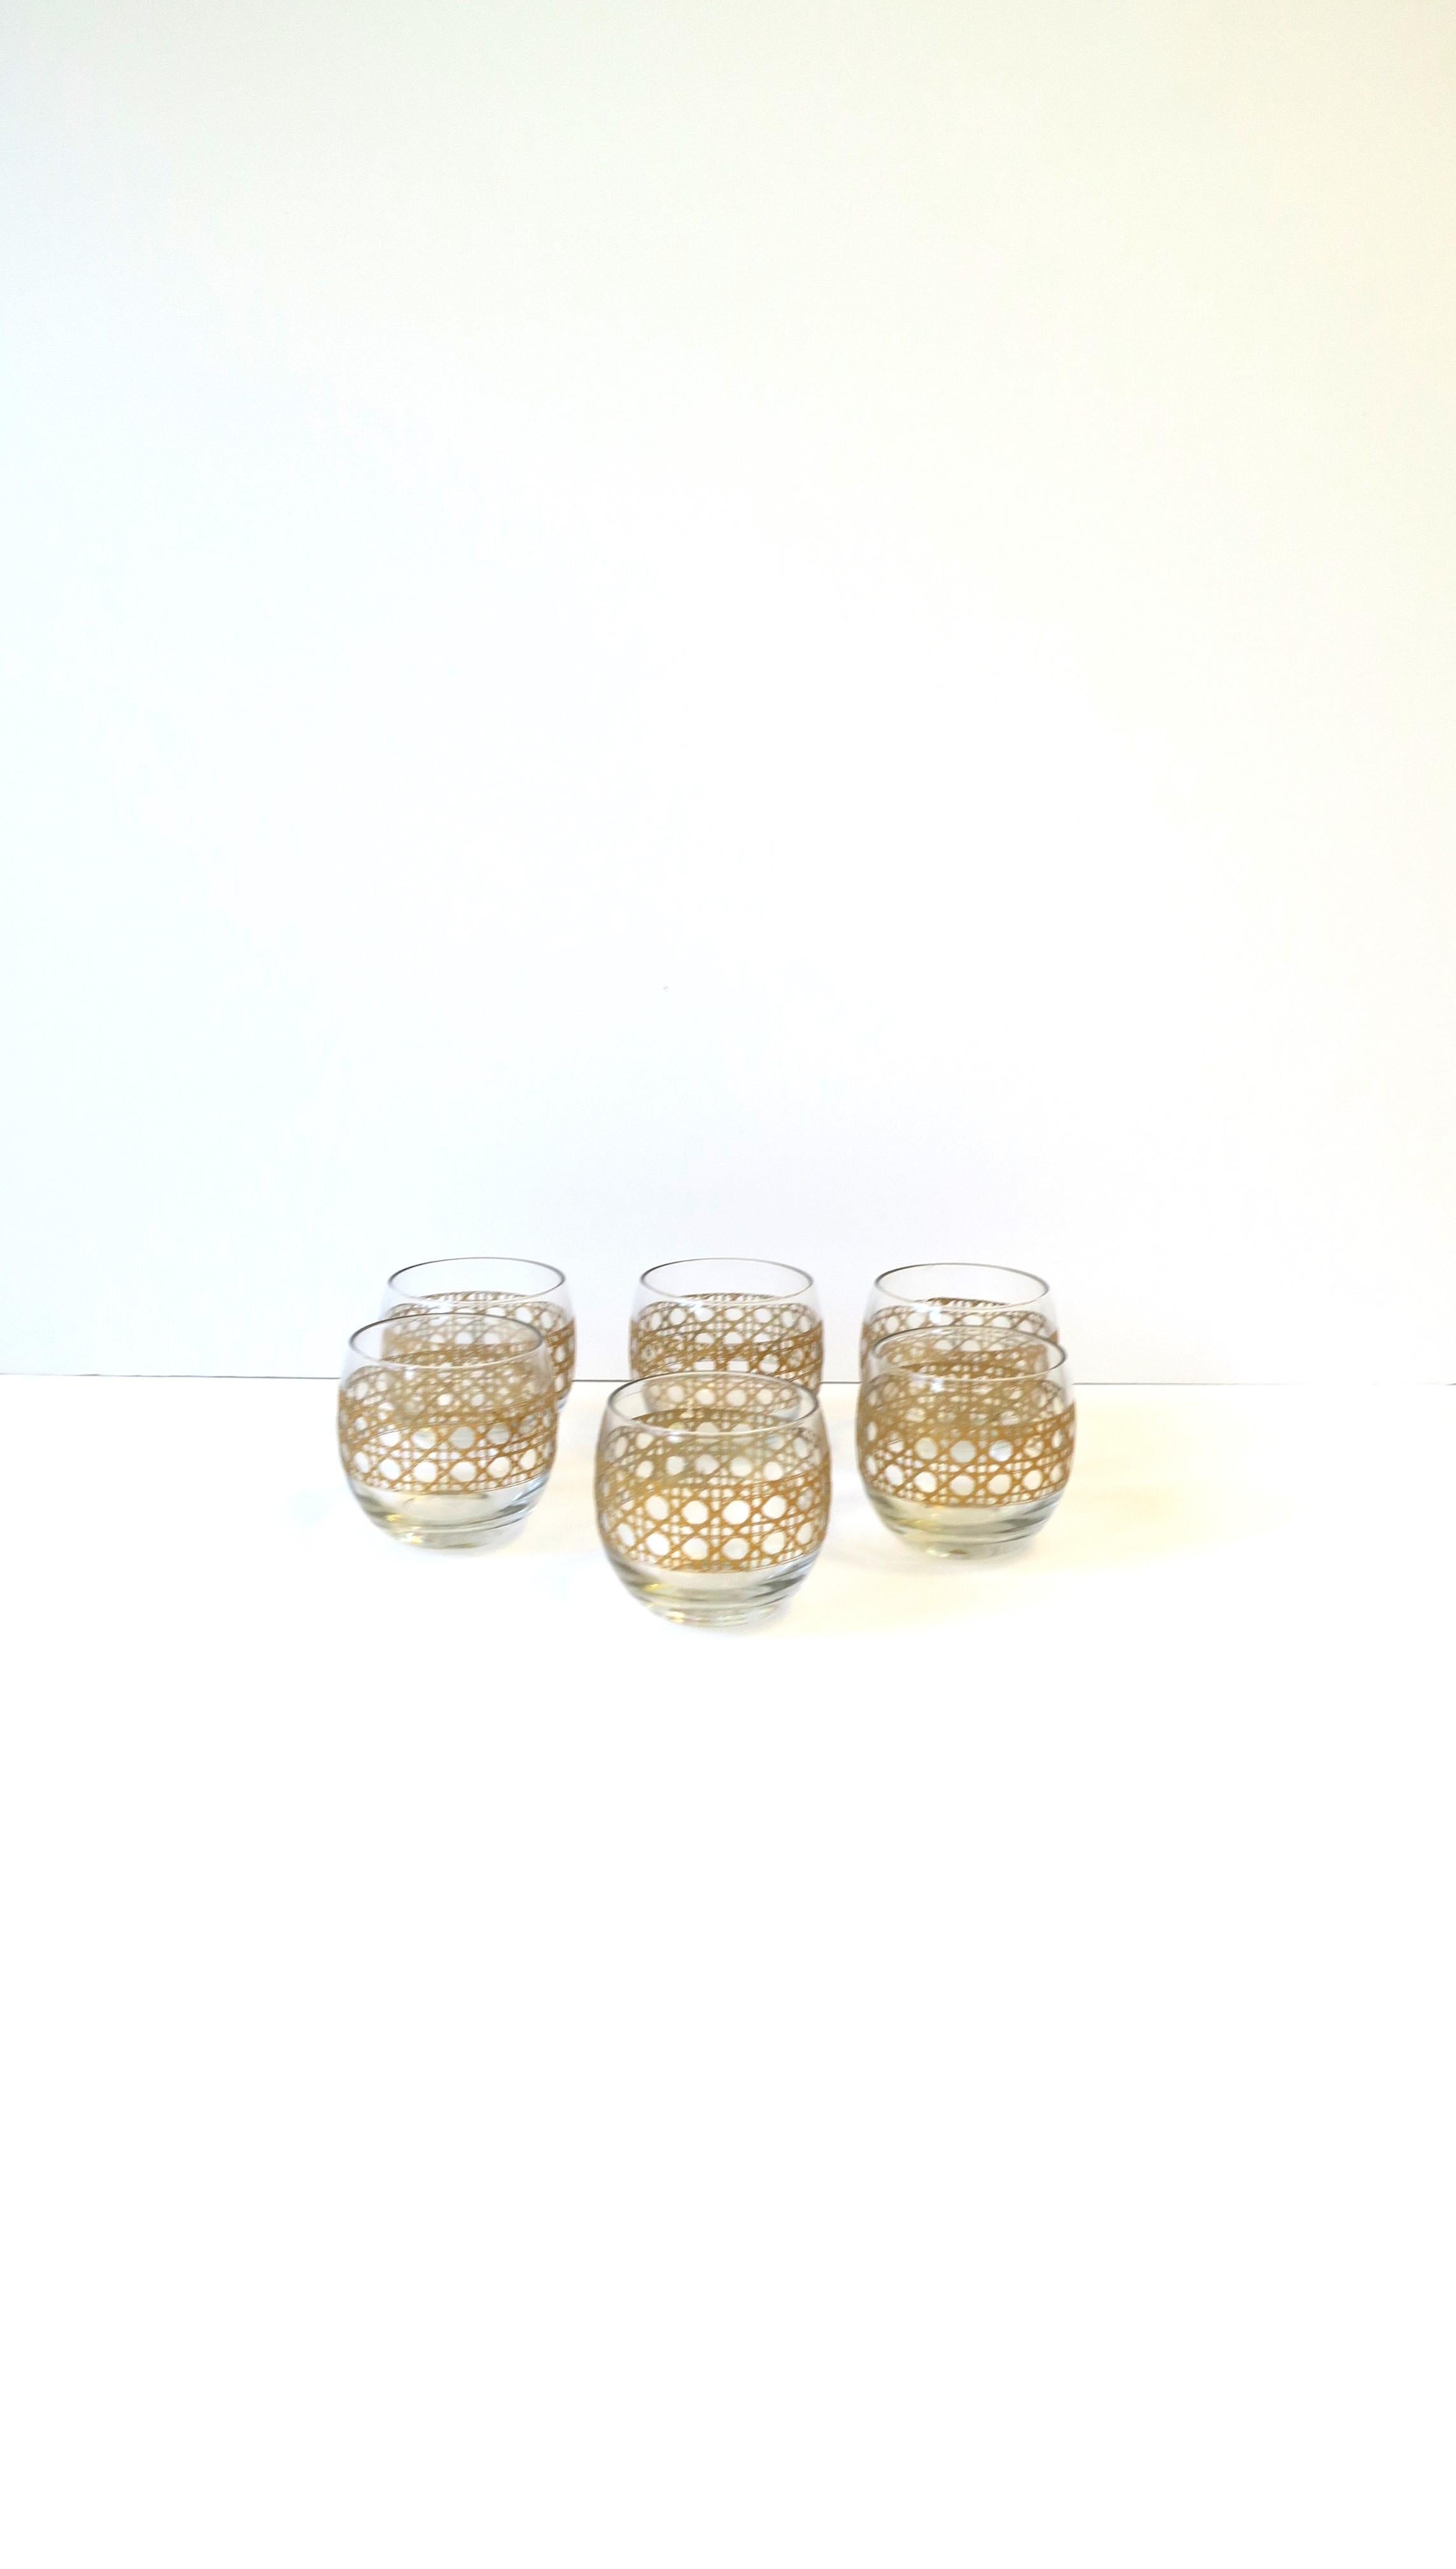 American Wicker Gold Cane Tumbler Cocktail Rocks' Glasses, Set of 6 For Sale